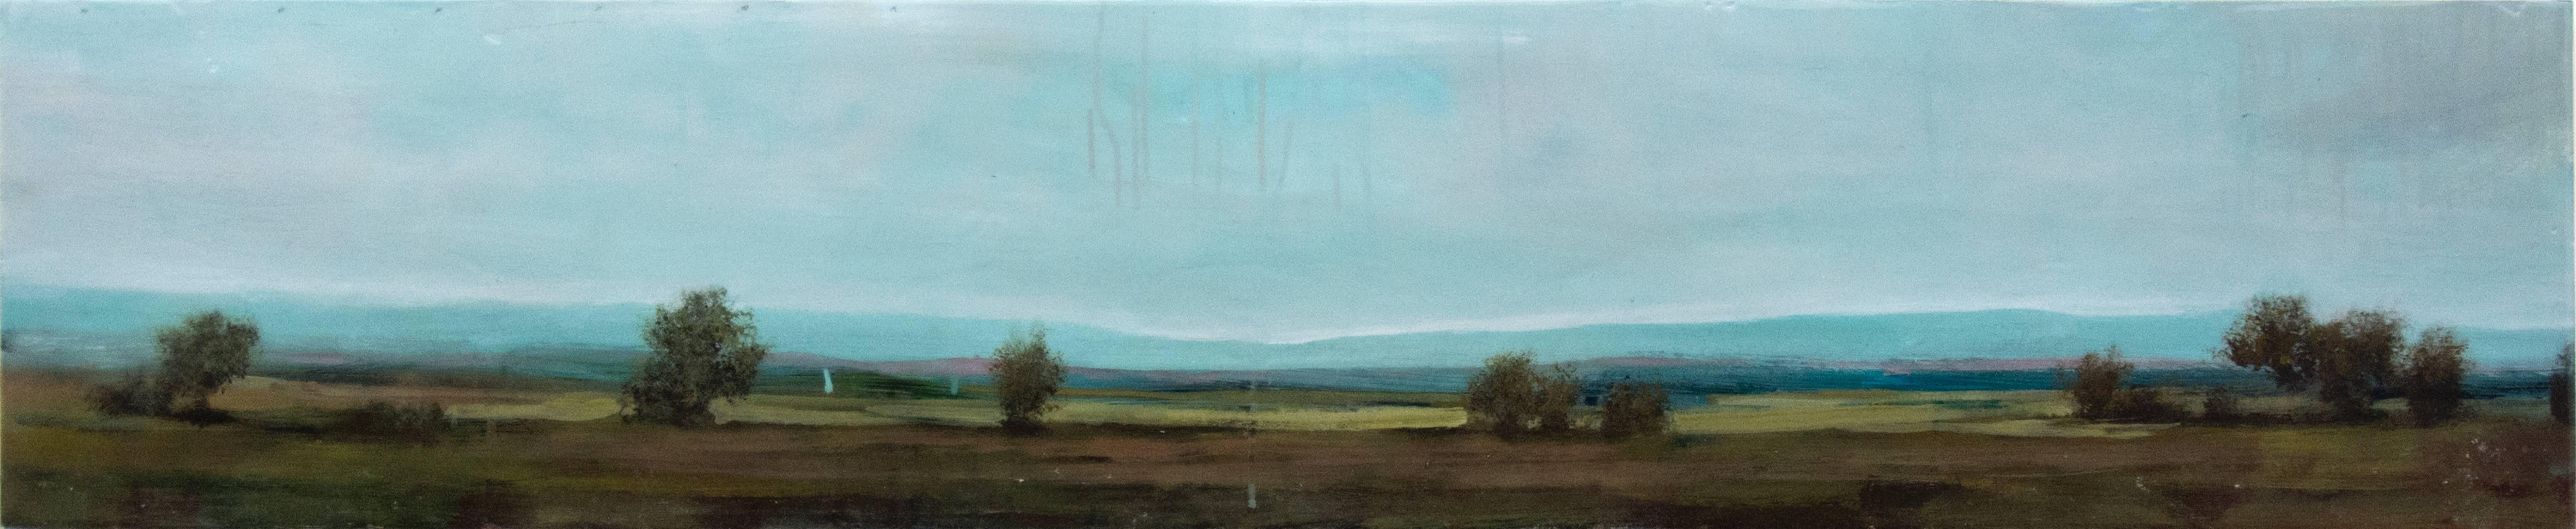 Peter Hoffer Landscape Painting - View South - green, blue, violet, panoramic landscape, acrylic on board